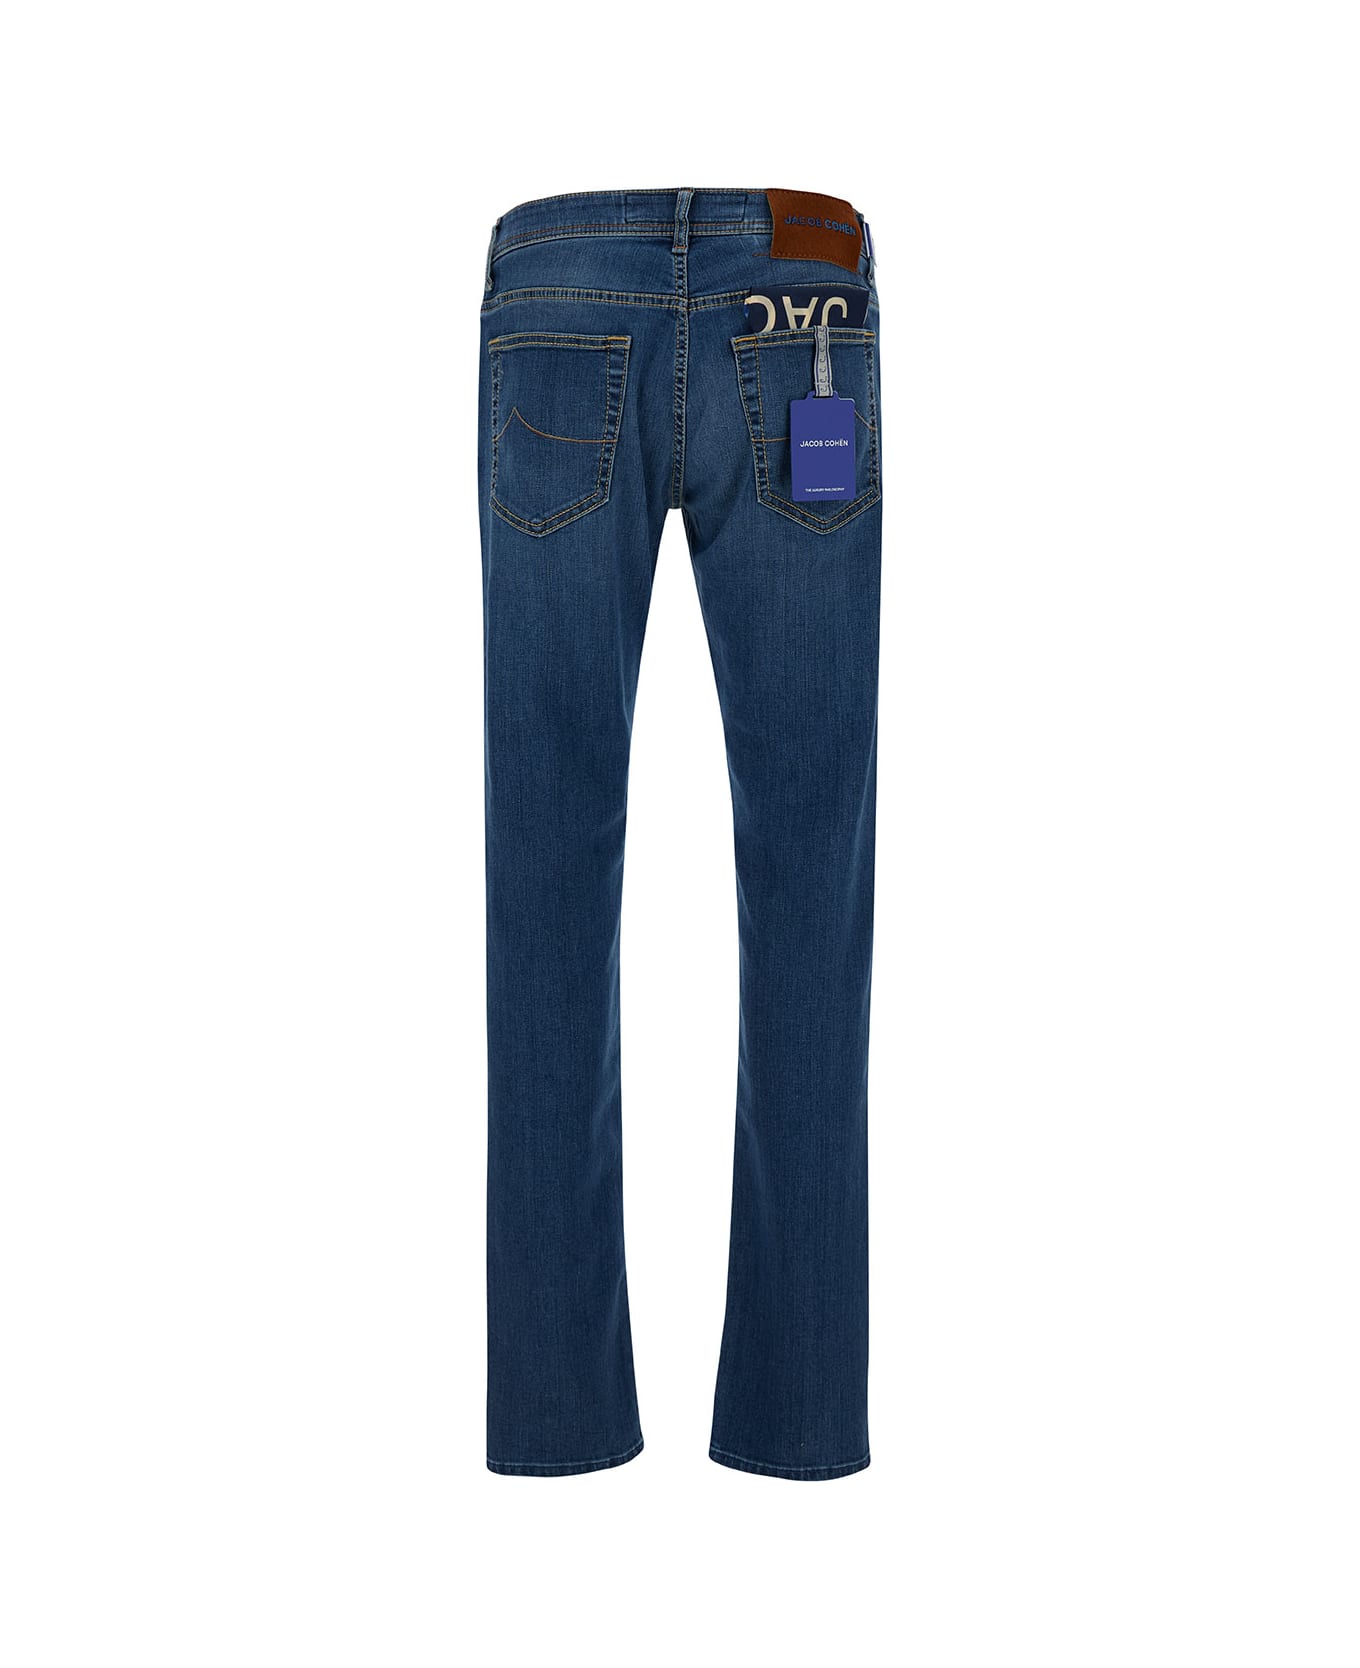 Jacob Cohen Blue Slim Low Waisted Jeans With Patch In Cotton Denim Man Jeans - DENIM MEDIO